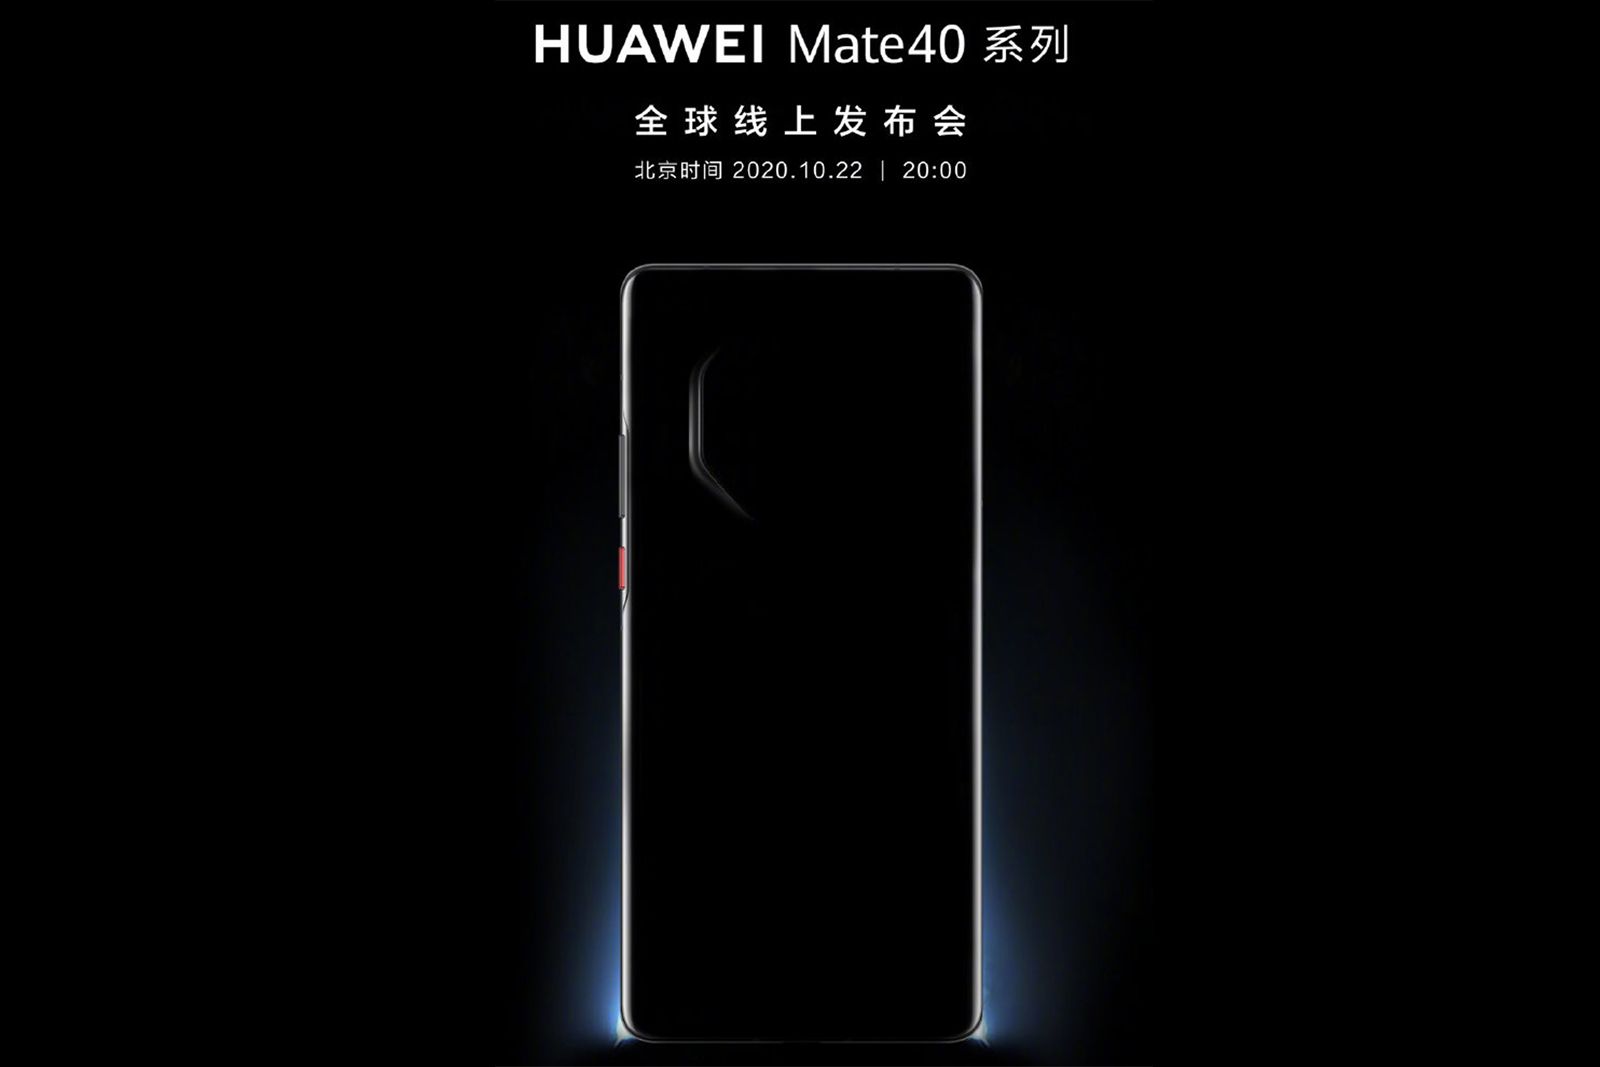 The Huawei Mate 40 seems to have an unusual looking camera module photo 1